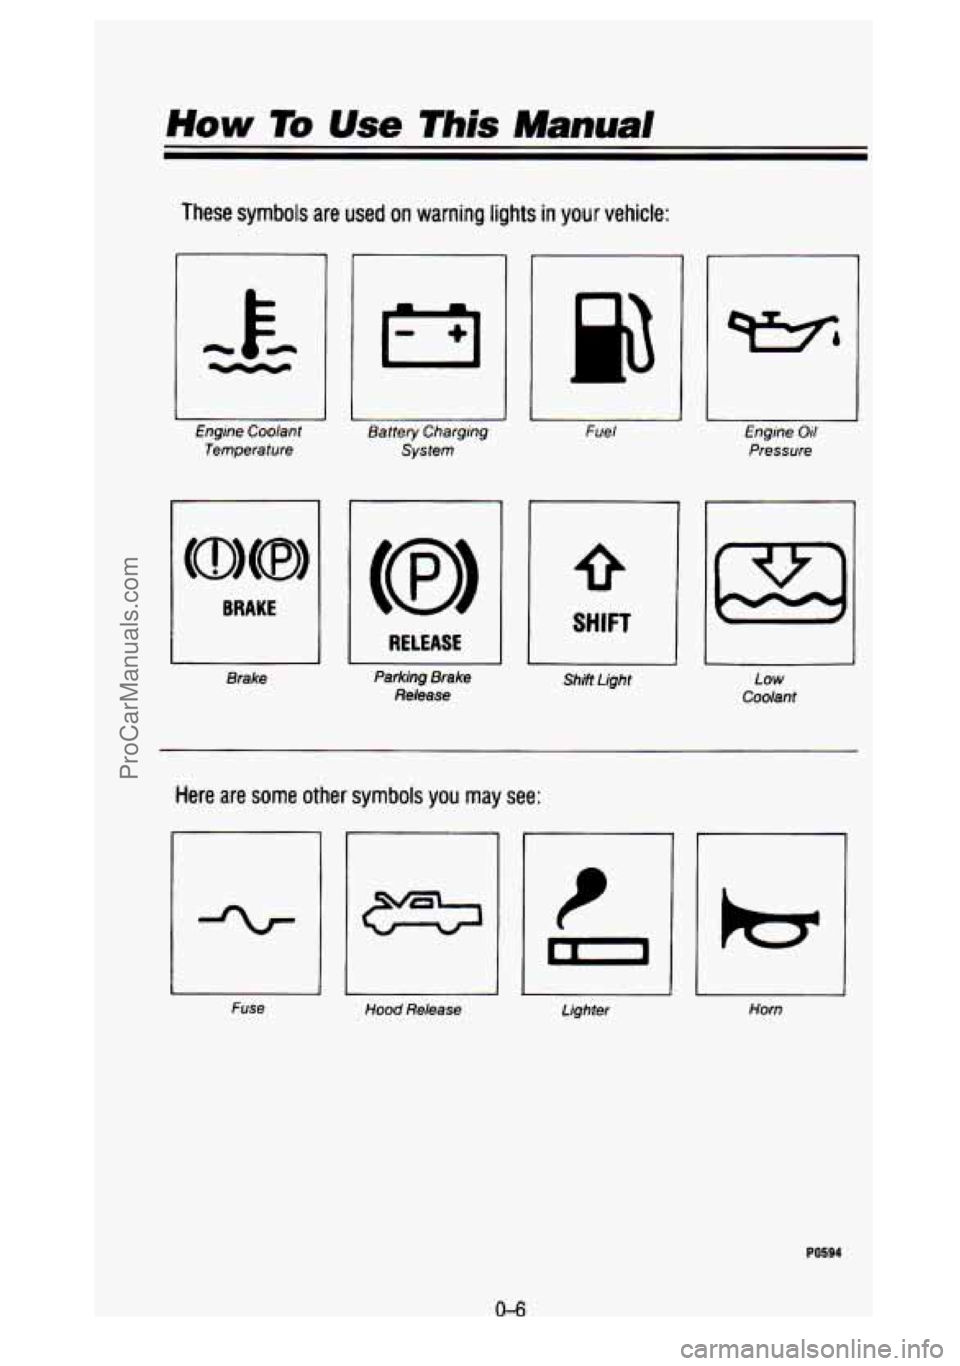 GMC SIERRA 1993  Owners Manual How To Use This Manual 
These symbols are  used on warning lights in your vehicle: 
1- 
Engine  Coolant Temperature 
BRAKE 
Brake  Battery 
Charging 
System 
I RELEASE 
Parking  Brake  Release 
s Fuel